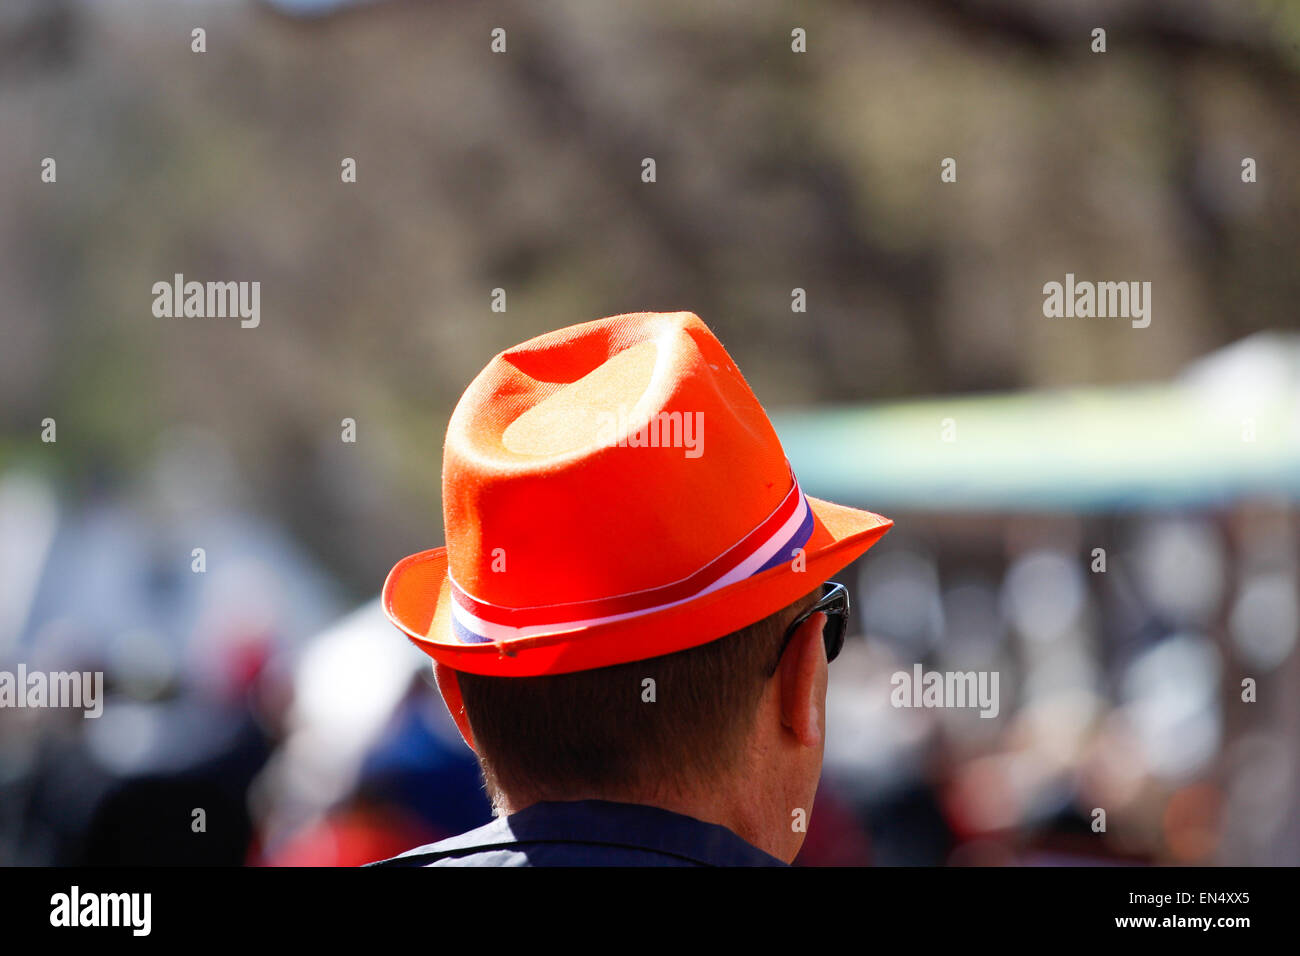 Voorschoten, Netherlands. 27th, April 2015. A man is seen with an orange hat and the Dutch flag. During the annual King’s Day celebrations people decorate themselves with orange colored accessories in honour of the royal family. Credit:  Jaap Arriens/Alamy Live News Stock Photo